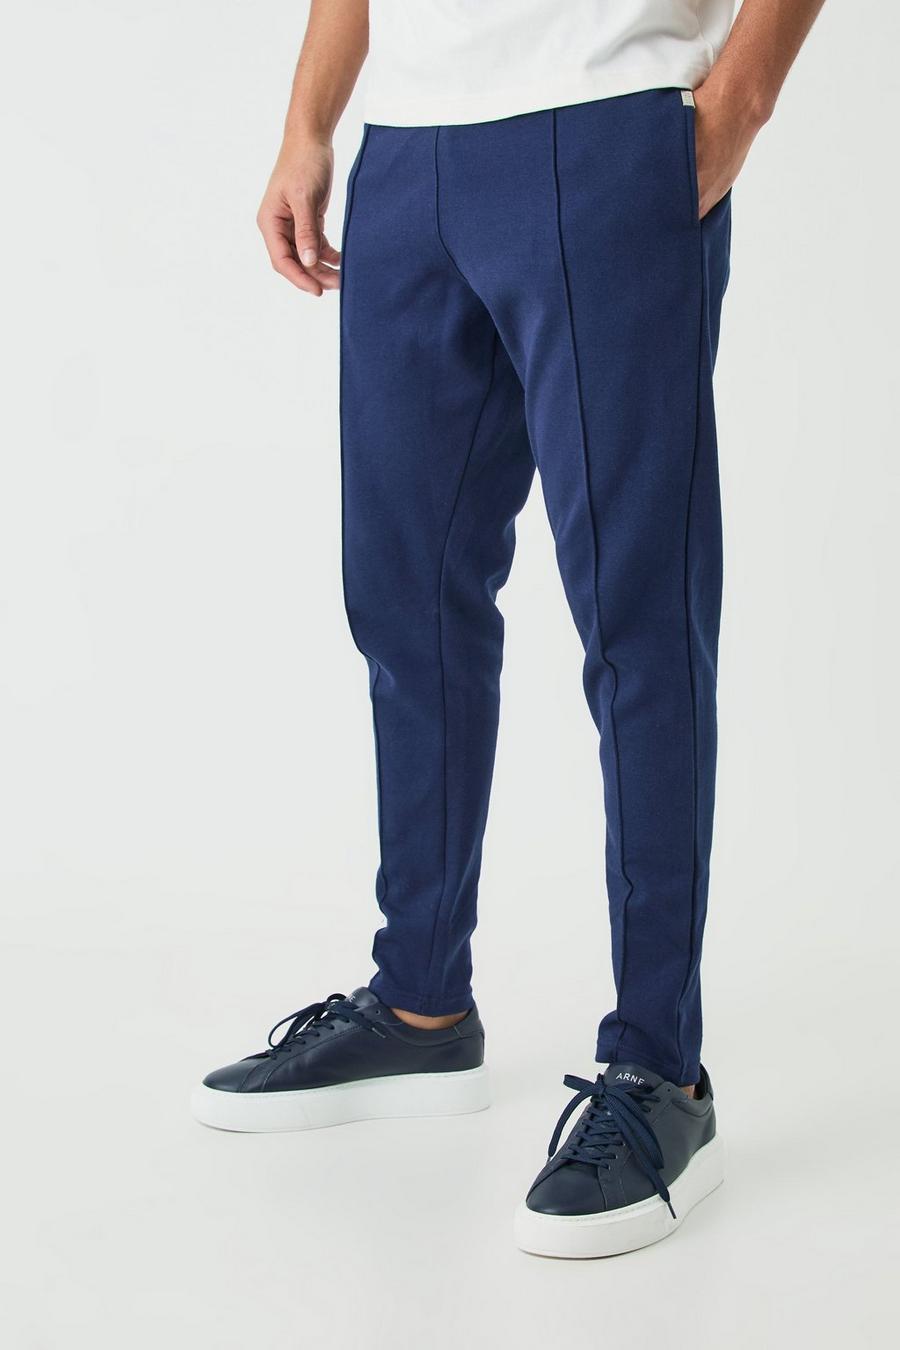 Navy All Occasion Wear 